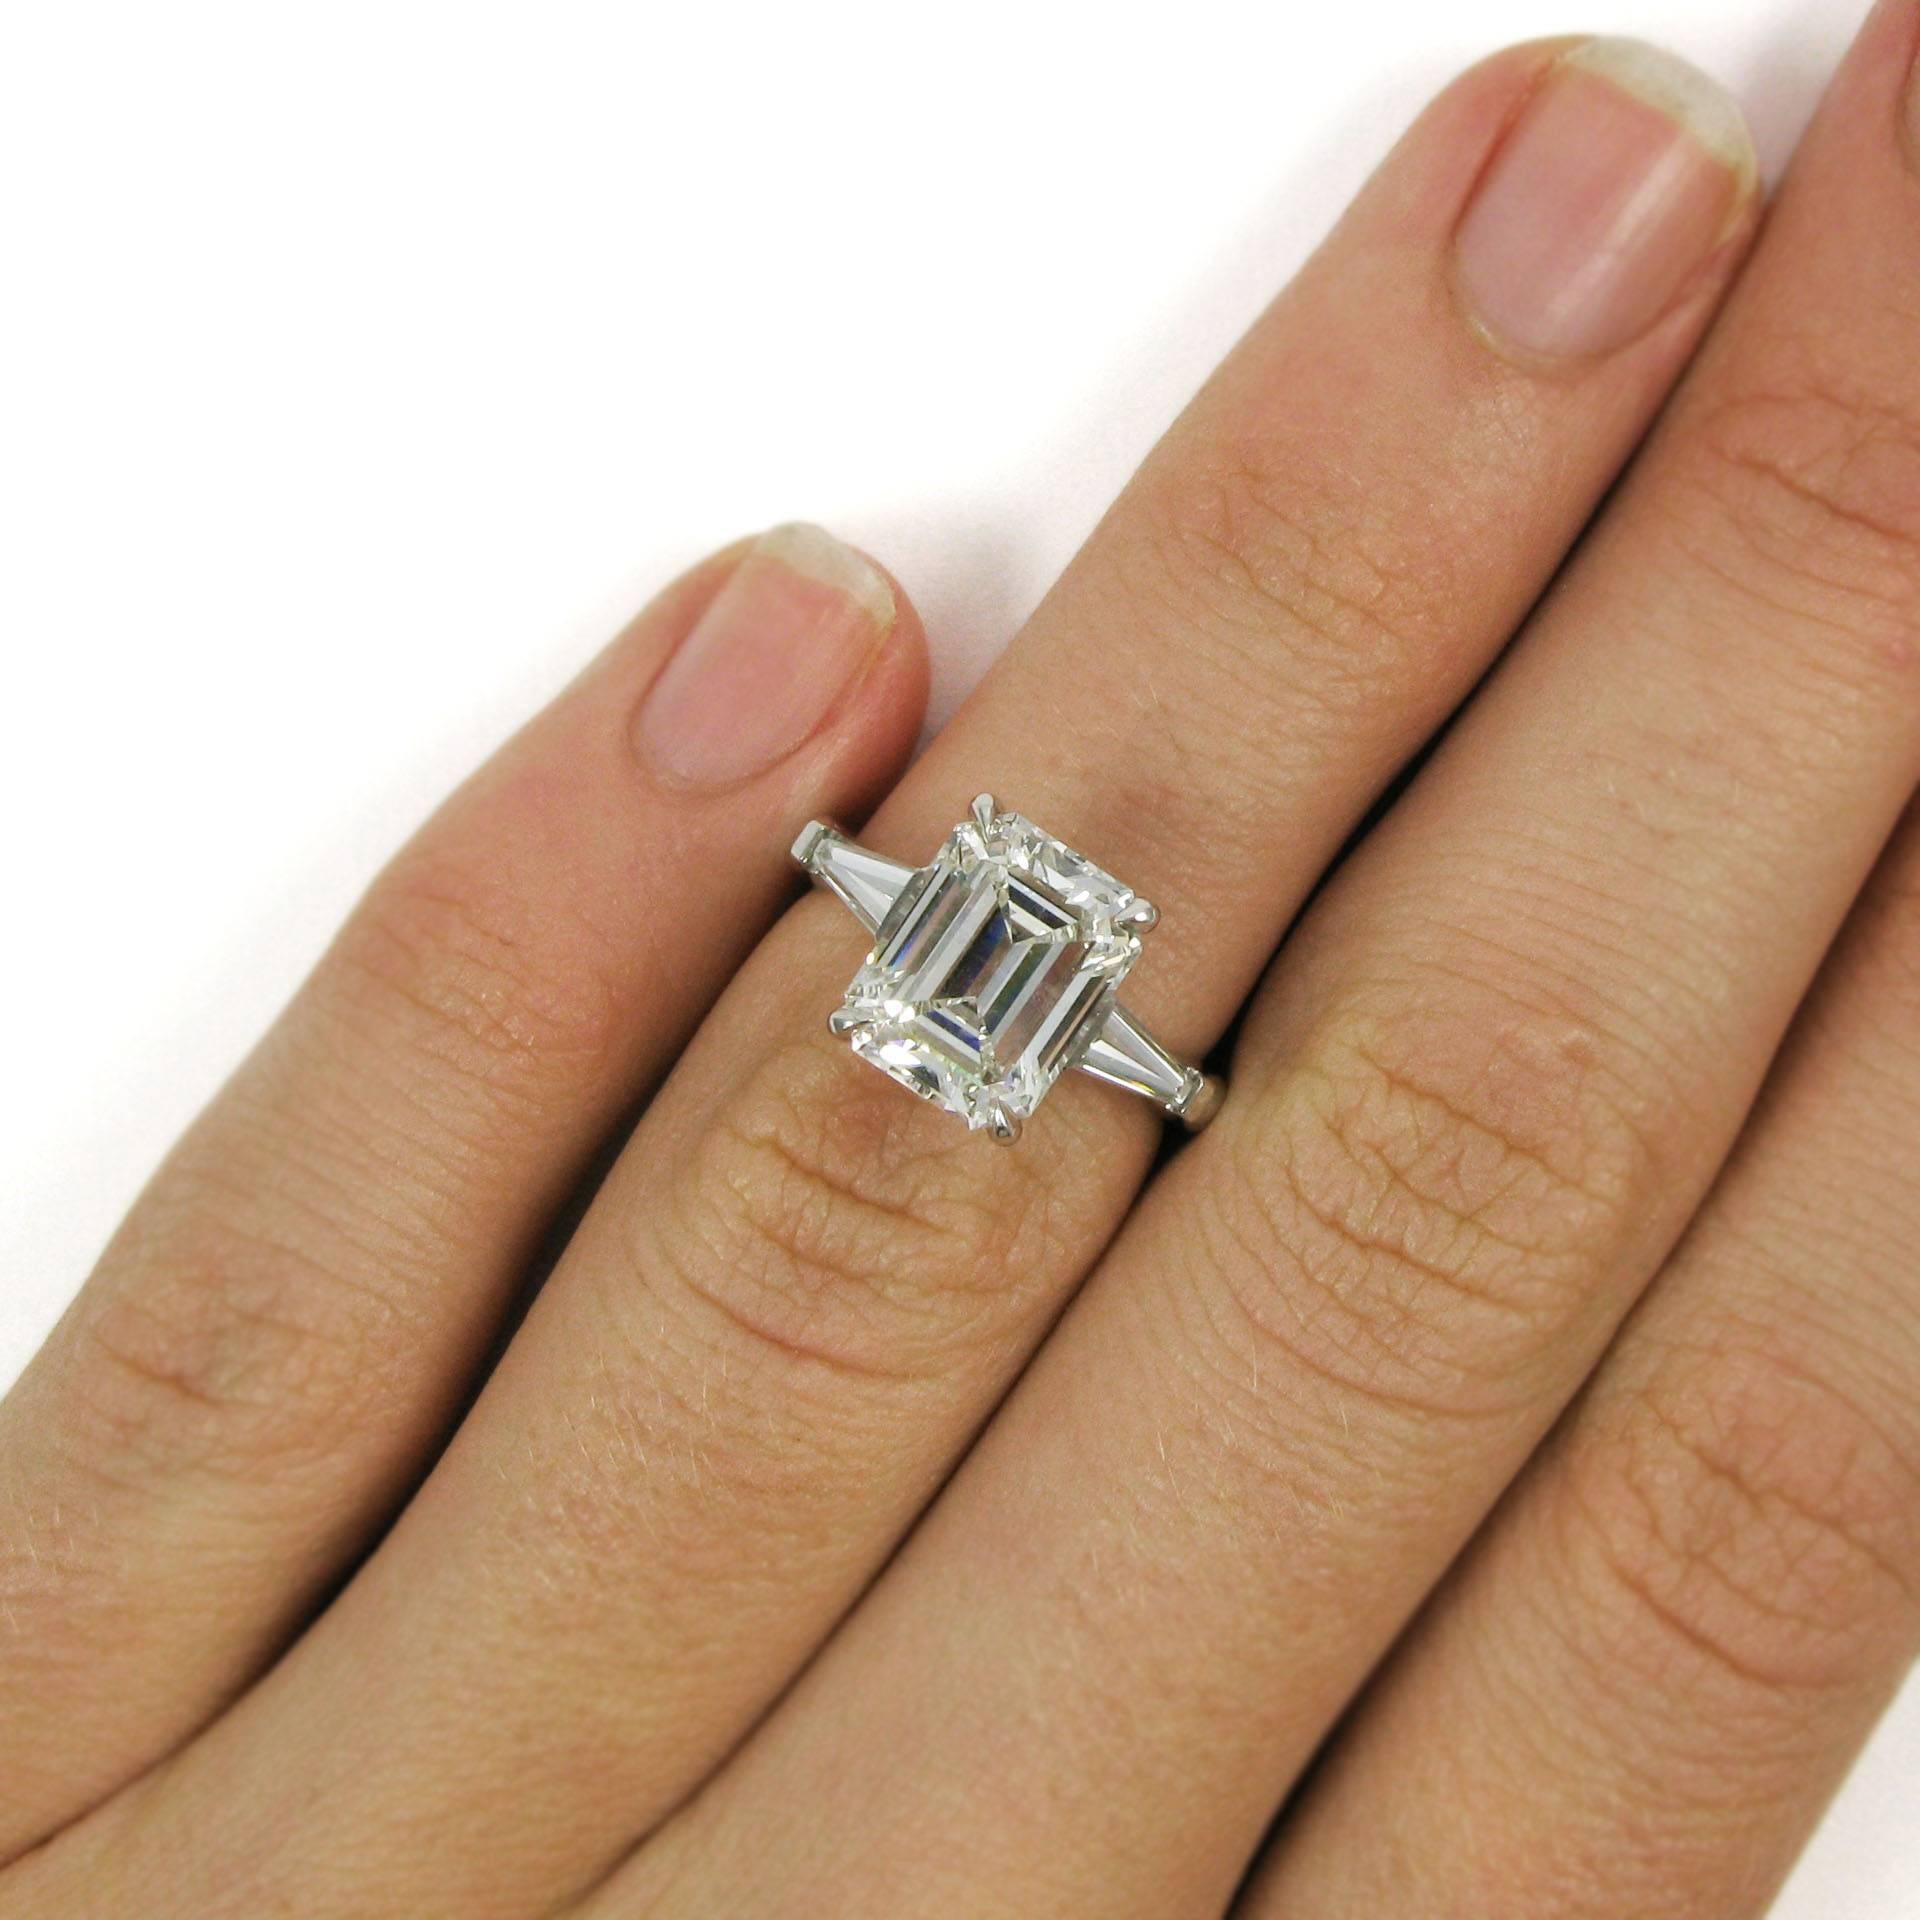 Classic and lovely! This platinum ring features a 3.24 carat emerald cut diamond in claw prong settings flanked by two bar-set tapered baguettes totaling approx. 0.62 carat. 

Purchase includes GIA Diamond Grading Report 5171582087, which states